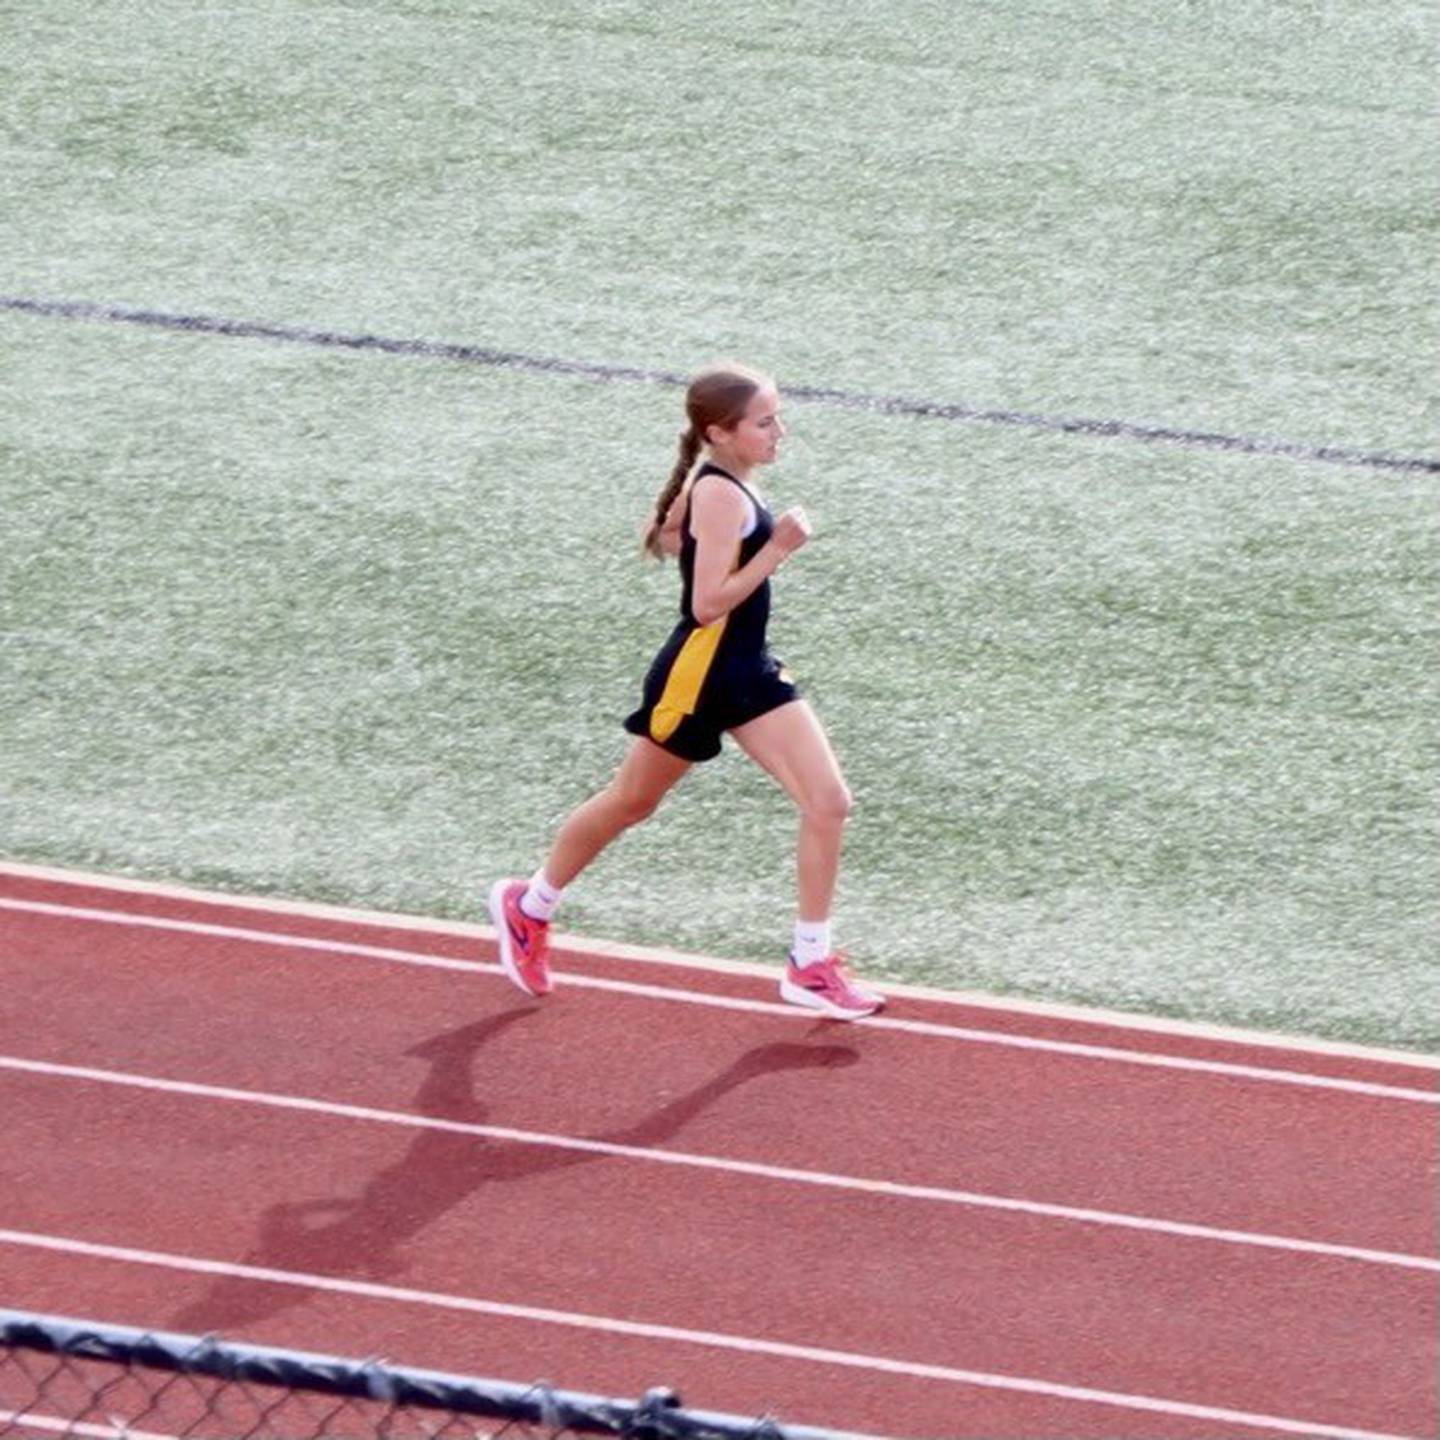 PCJH's Anniston Judd runs in the IESA 2A State Track & Field Meet in East Peoria. She placed eighth (2:32.43) in the 7th grade girls 800 meters and 10th (5:45.5) in the 1,600 meters.